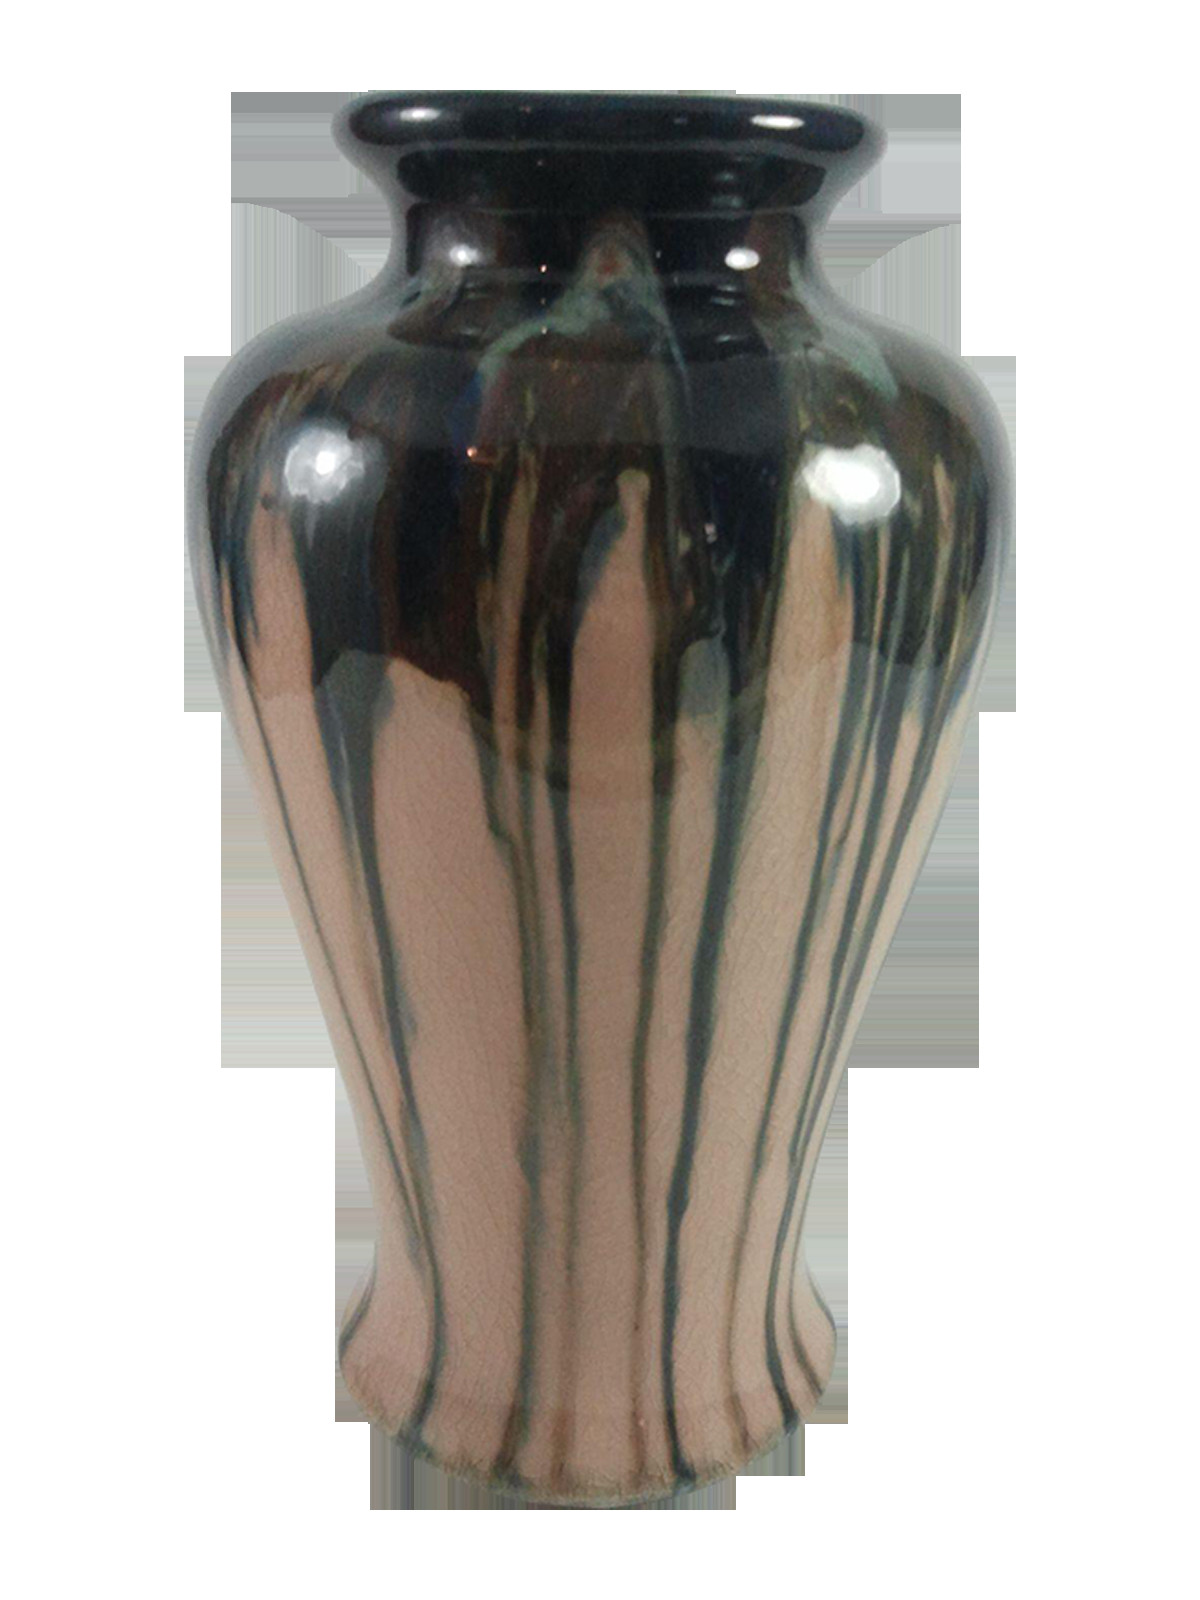 blue and brown ceramic vase of intense blues and browns in a drip glaze make this vase one of a throughout intense blues and browns in a drip glaze make this vase one of a kind in super condition with only minor crazing mouth 2 5dia marked peters and reed